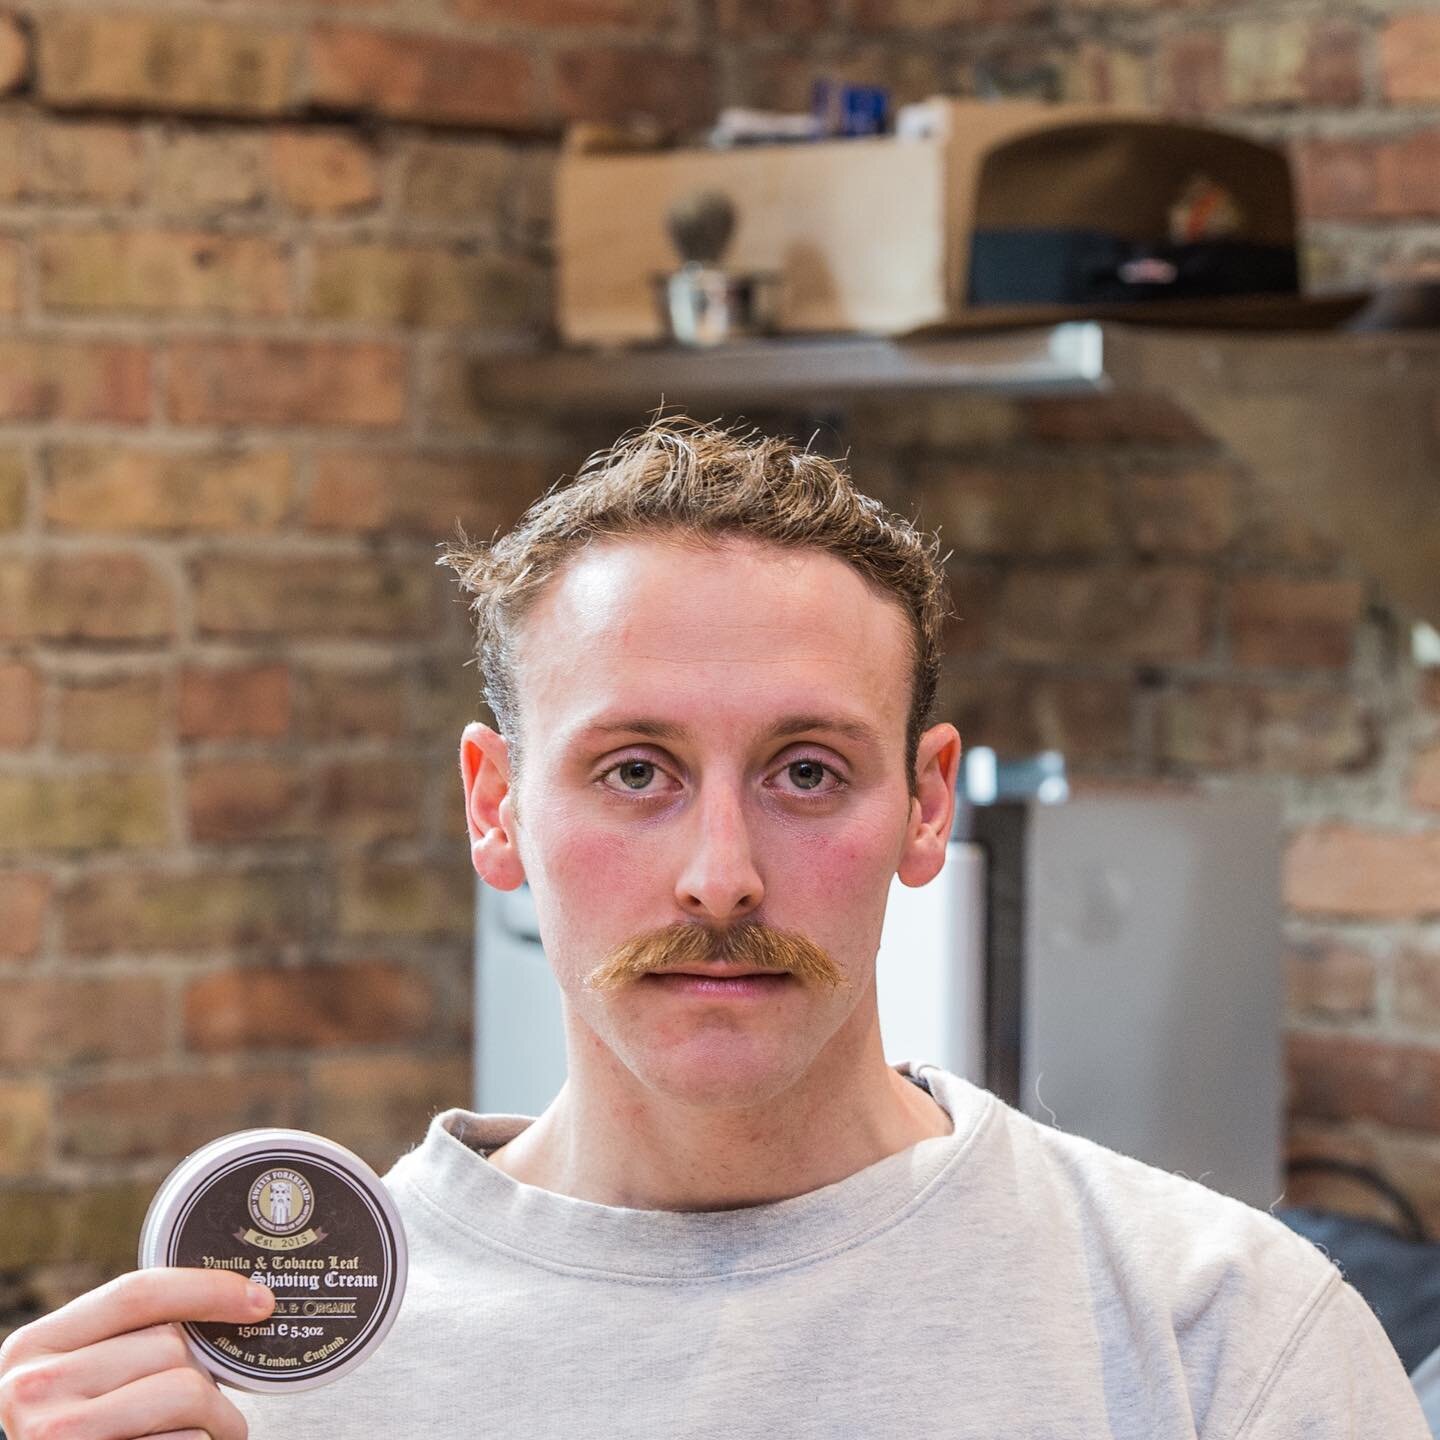 💈Enjoy a shave this #Movember with @solo_barber and take home your very own @sweynforkbeard shaving cream, exclusively at @solosalon💈
&bull;
&bull;
&bull;
#savedeeznuts #menshealthawareness #mensgrooming #westloopisthebestloop #chicagosbest @movemb